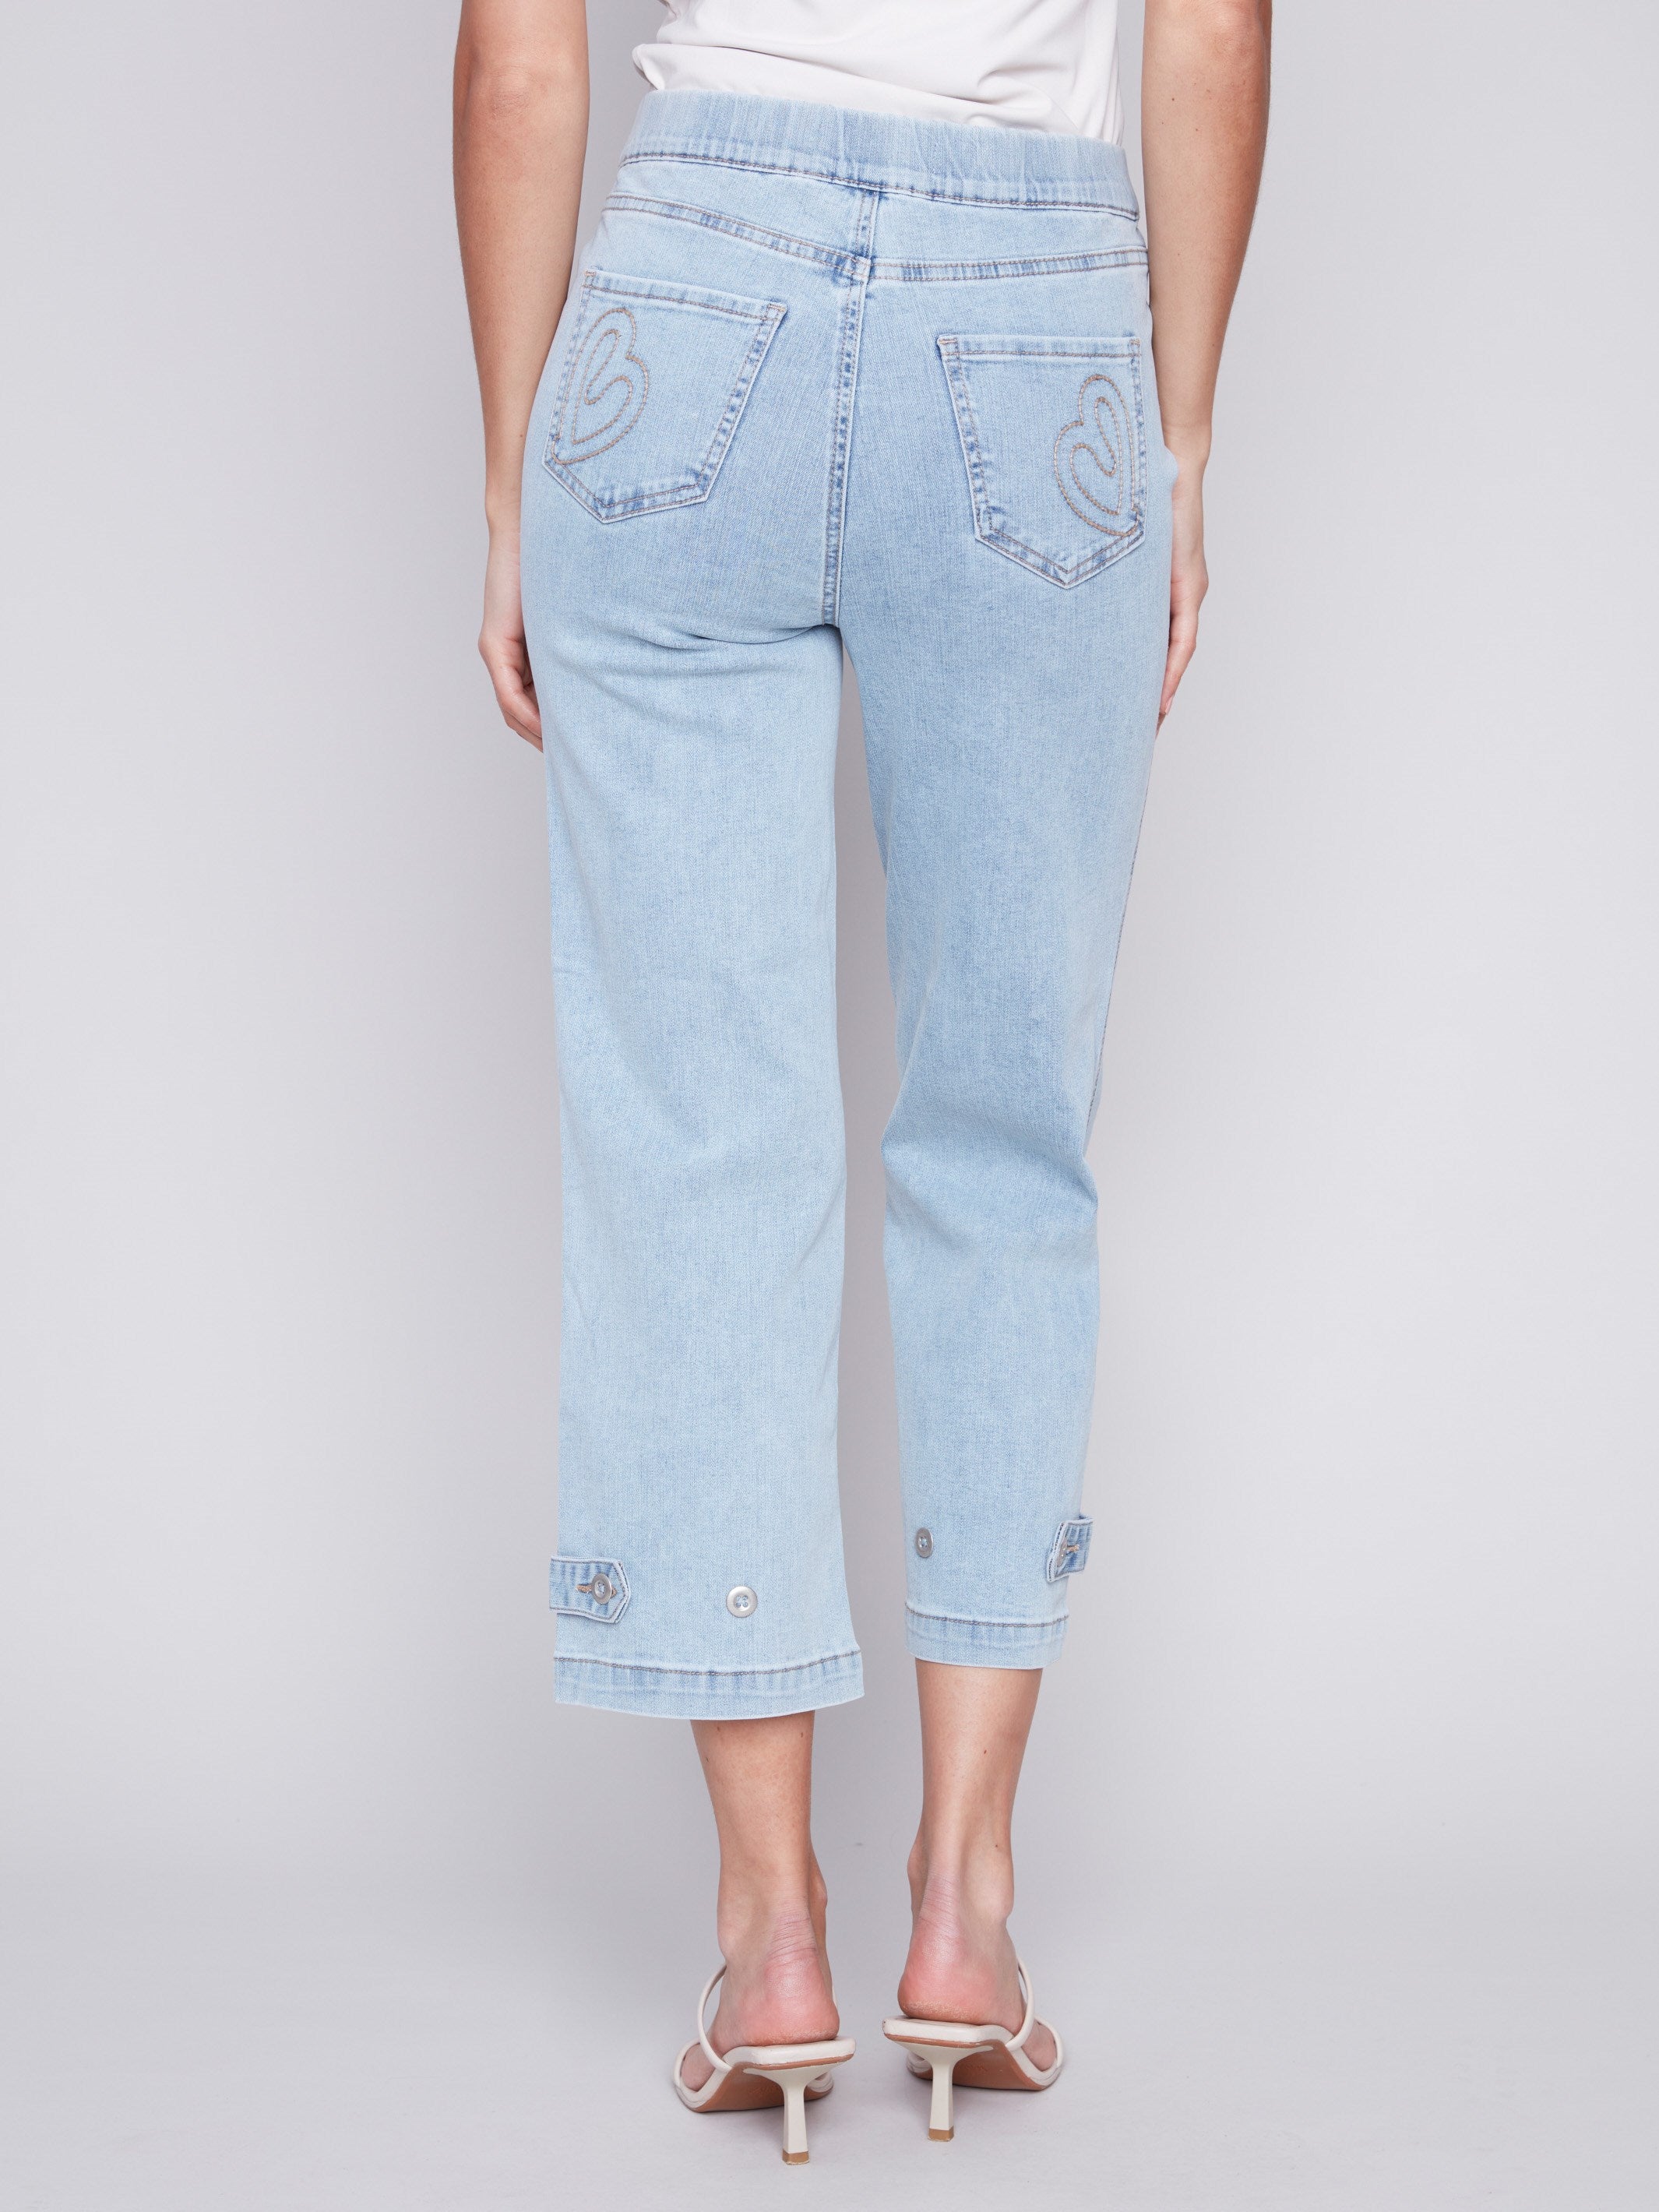 Cropped Pull-On Jeans with Hem Tab - Bleach Blue - Charlie B Collection Canada - Image 3